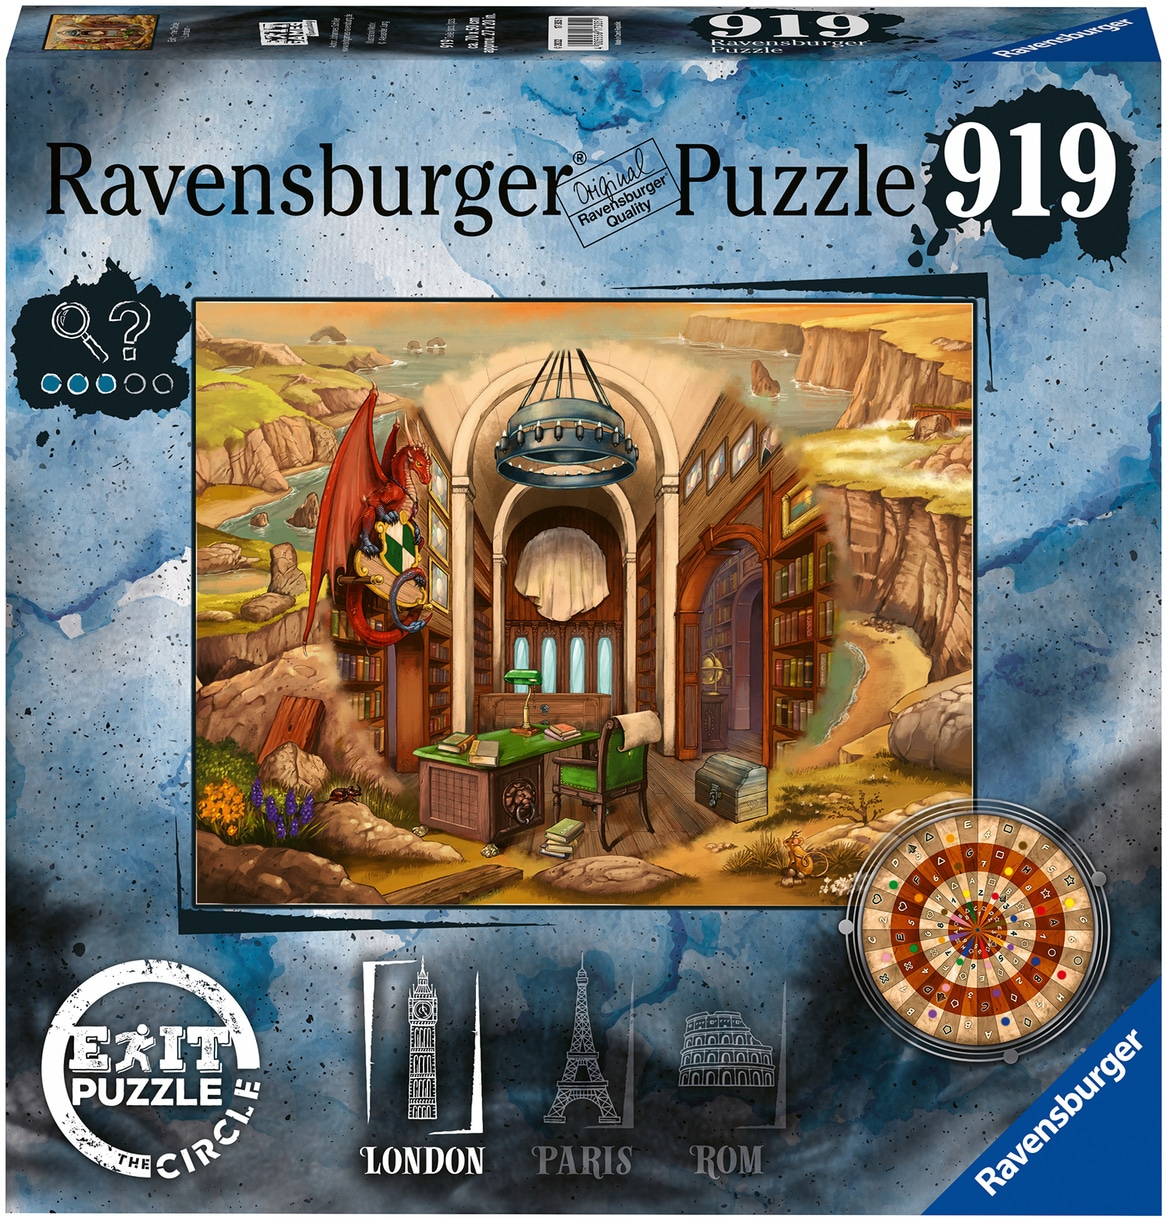 Ravensburger Puzzle »EXIT,: the Circle in London«, Made in Germany, FSC® - schützt Wald - weltweit